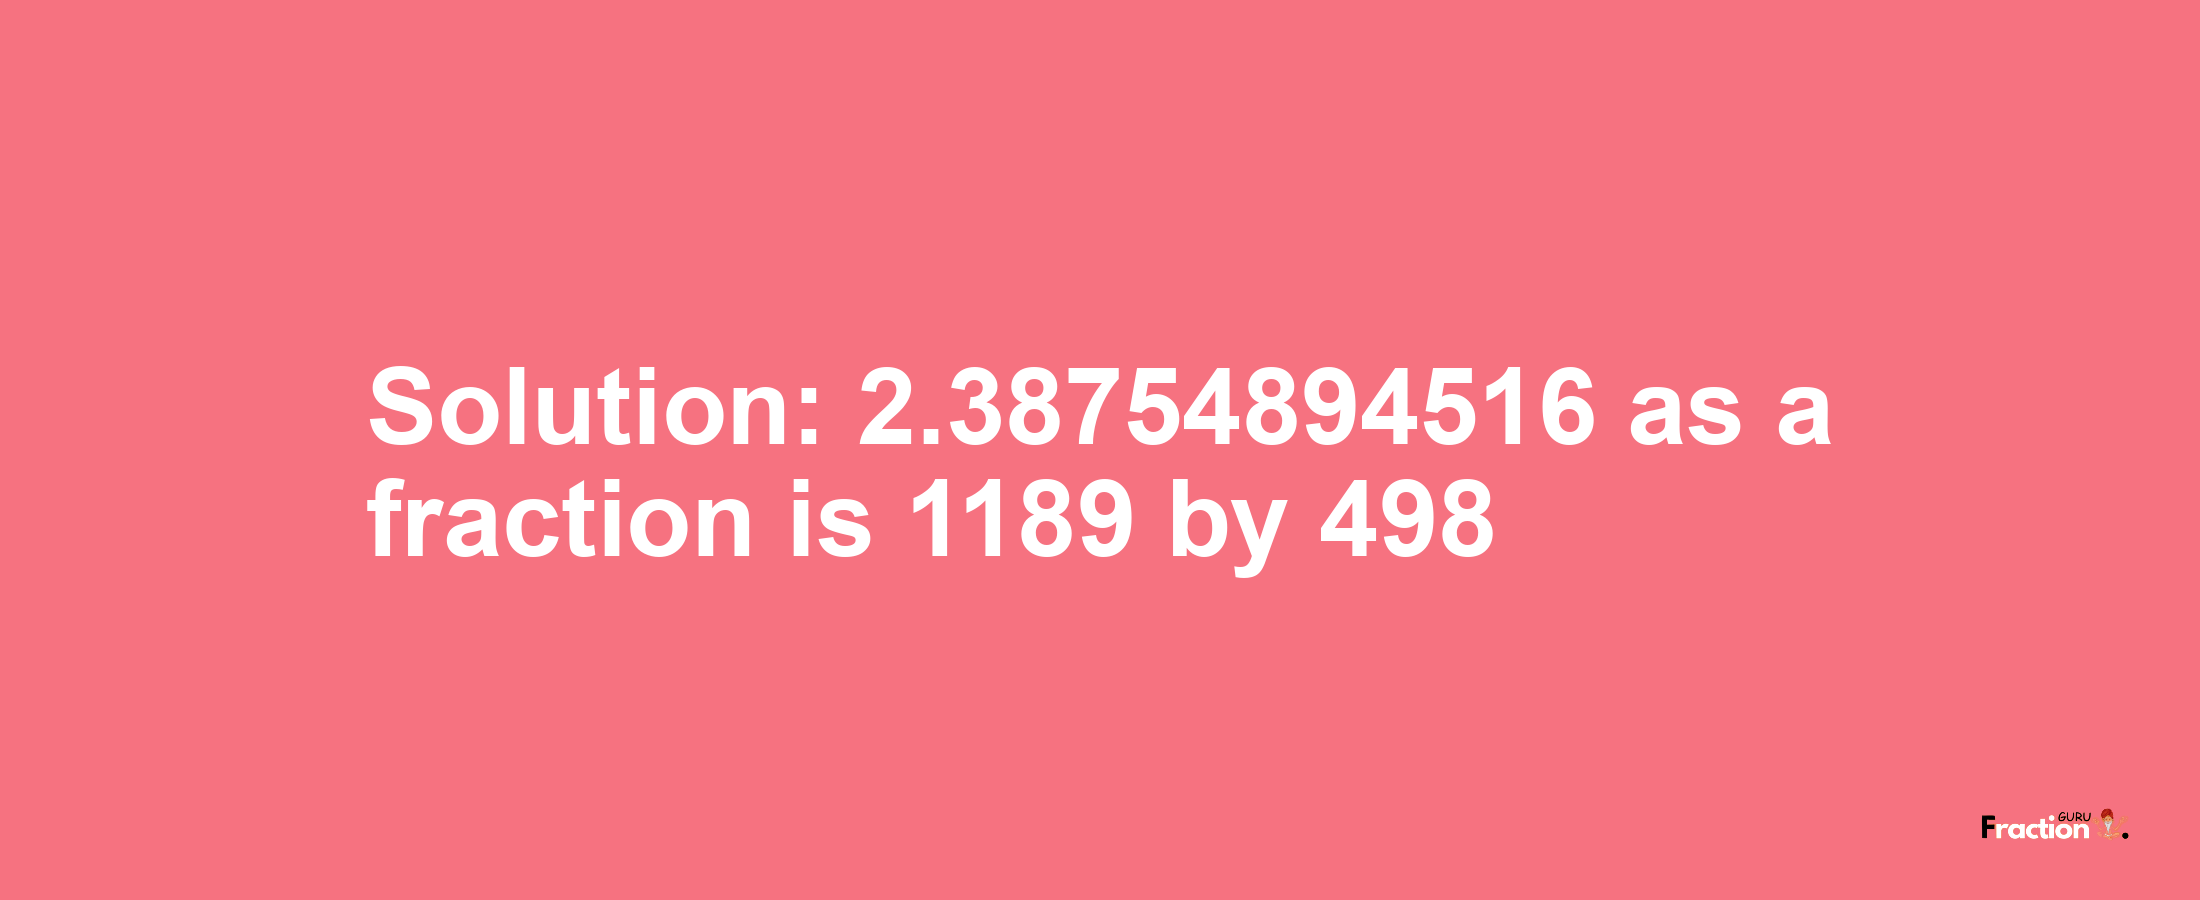 Solution:2.38754894516 as a fraction is 1189/498